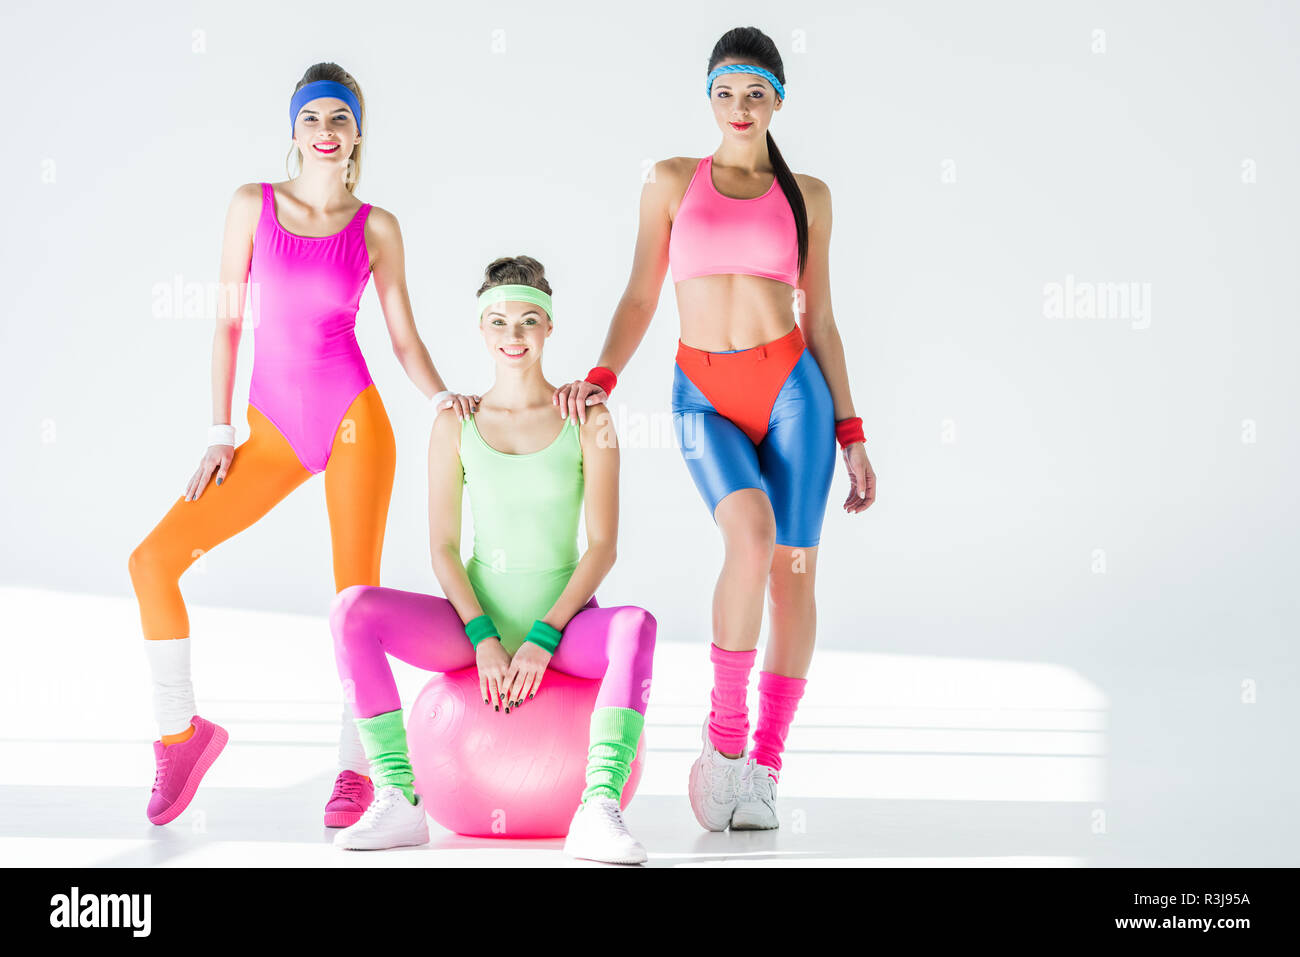 women in 80s style sportswear smiling at camera on grey Stock Photo -